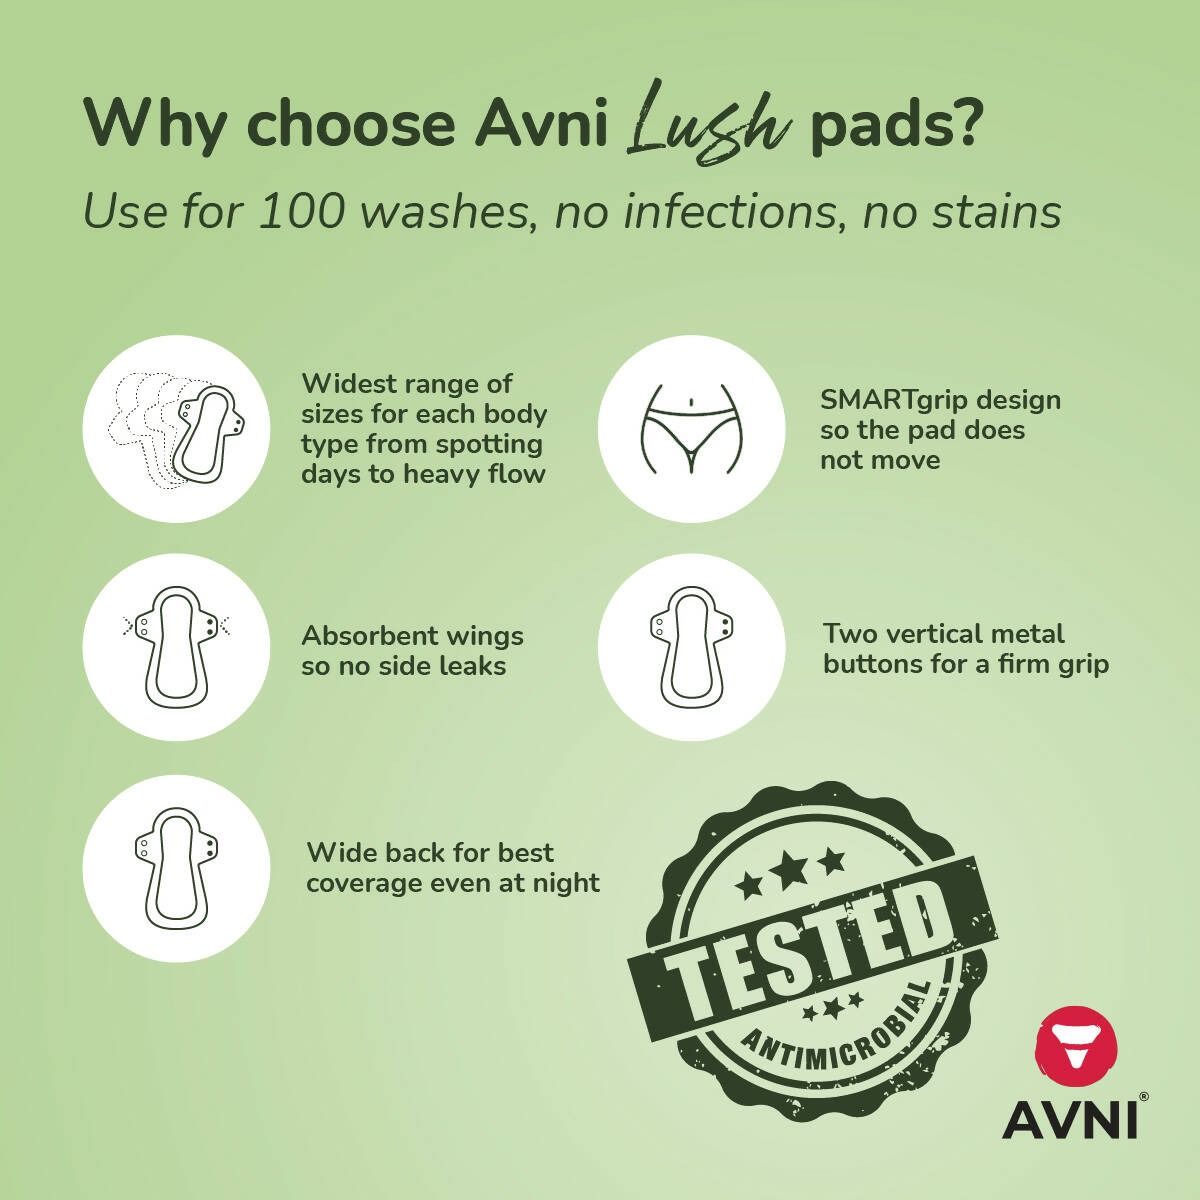 Avni Lush Certified 100% Organic Cotton Washable Cloth Pads, 1 R + 1 L (1 X 240MM + 1 X 280MM, Pack of 2) | Antimicrobial Reusable Cloth Sanitary Pad | With Cloth Storage pouch Wemy Store